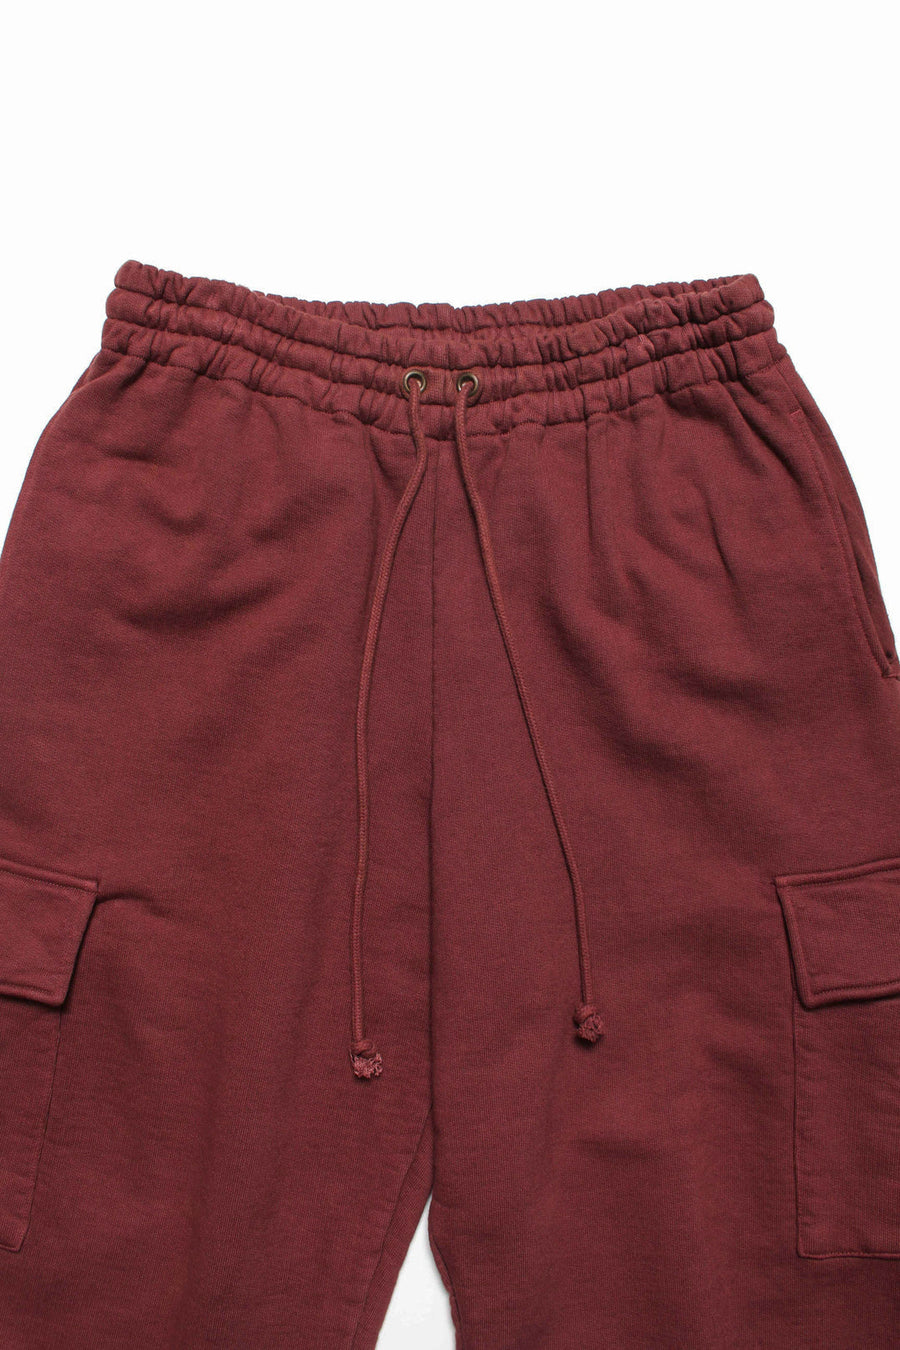 〈BOW WOW〉SWEAT CARGO PANTS / BROWN